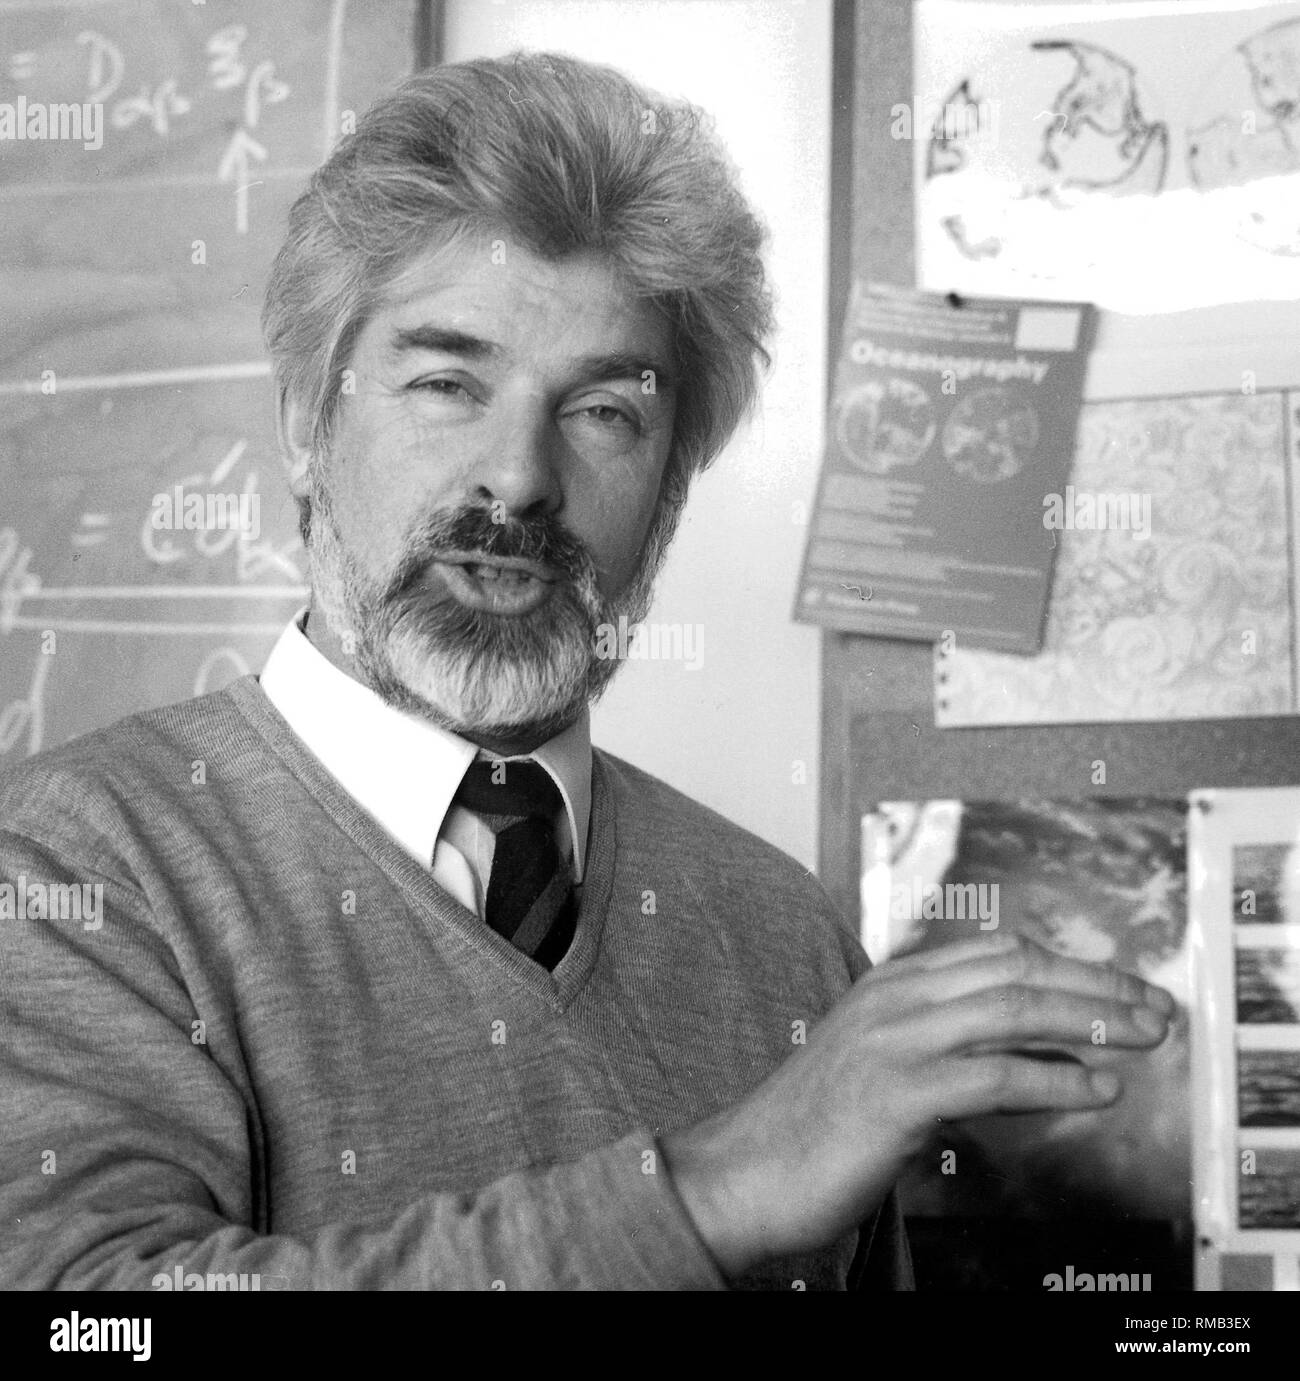 Klaus Hasselmann (born on 25 Oct. 1931 in Hamburg) German climate researcher, meteorologist, oceanologist and director of the Max Planck Institute for Meteorology, Hamburg (1986). Stock Photo